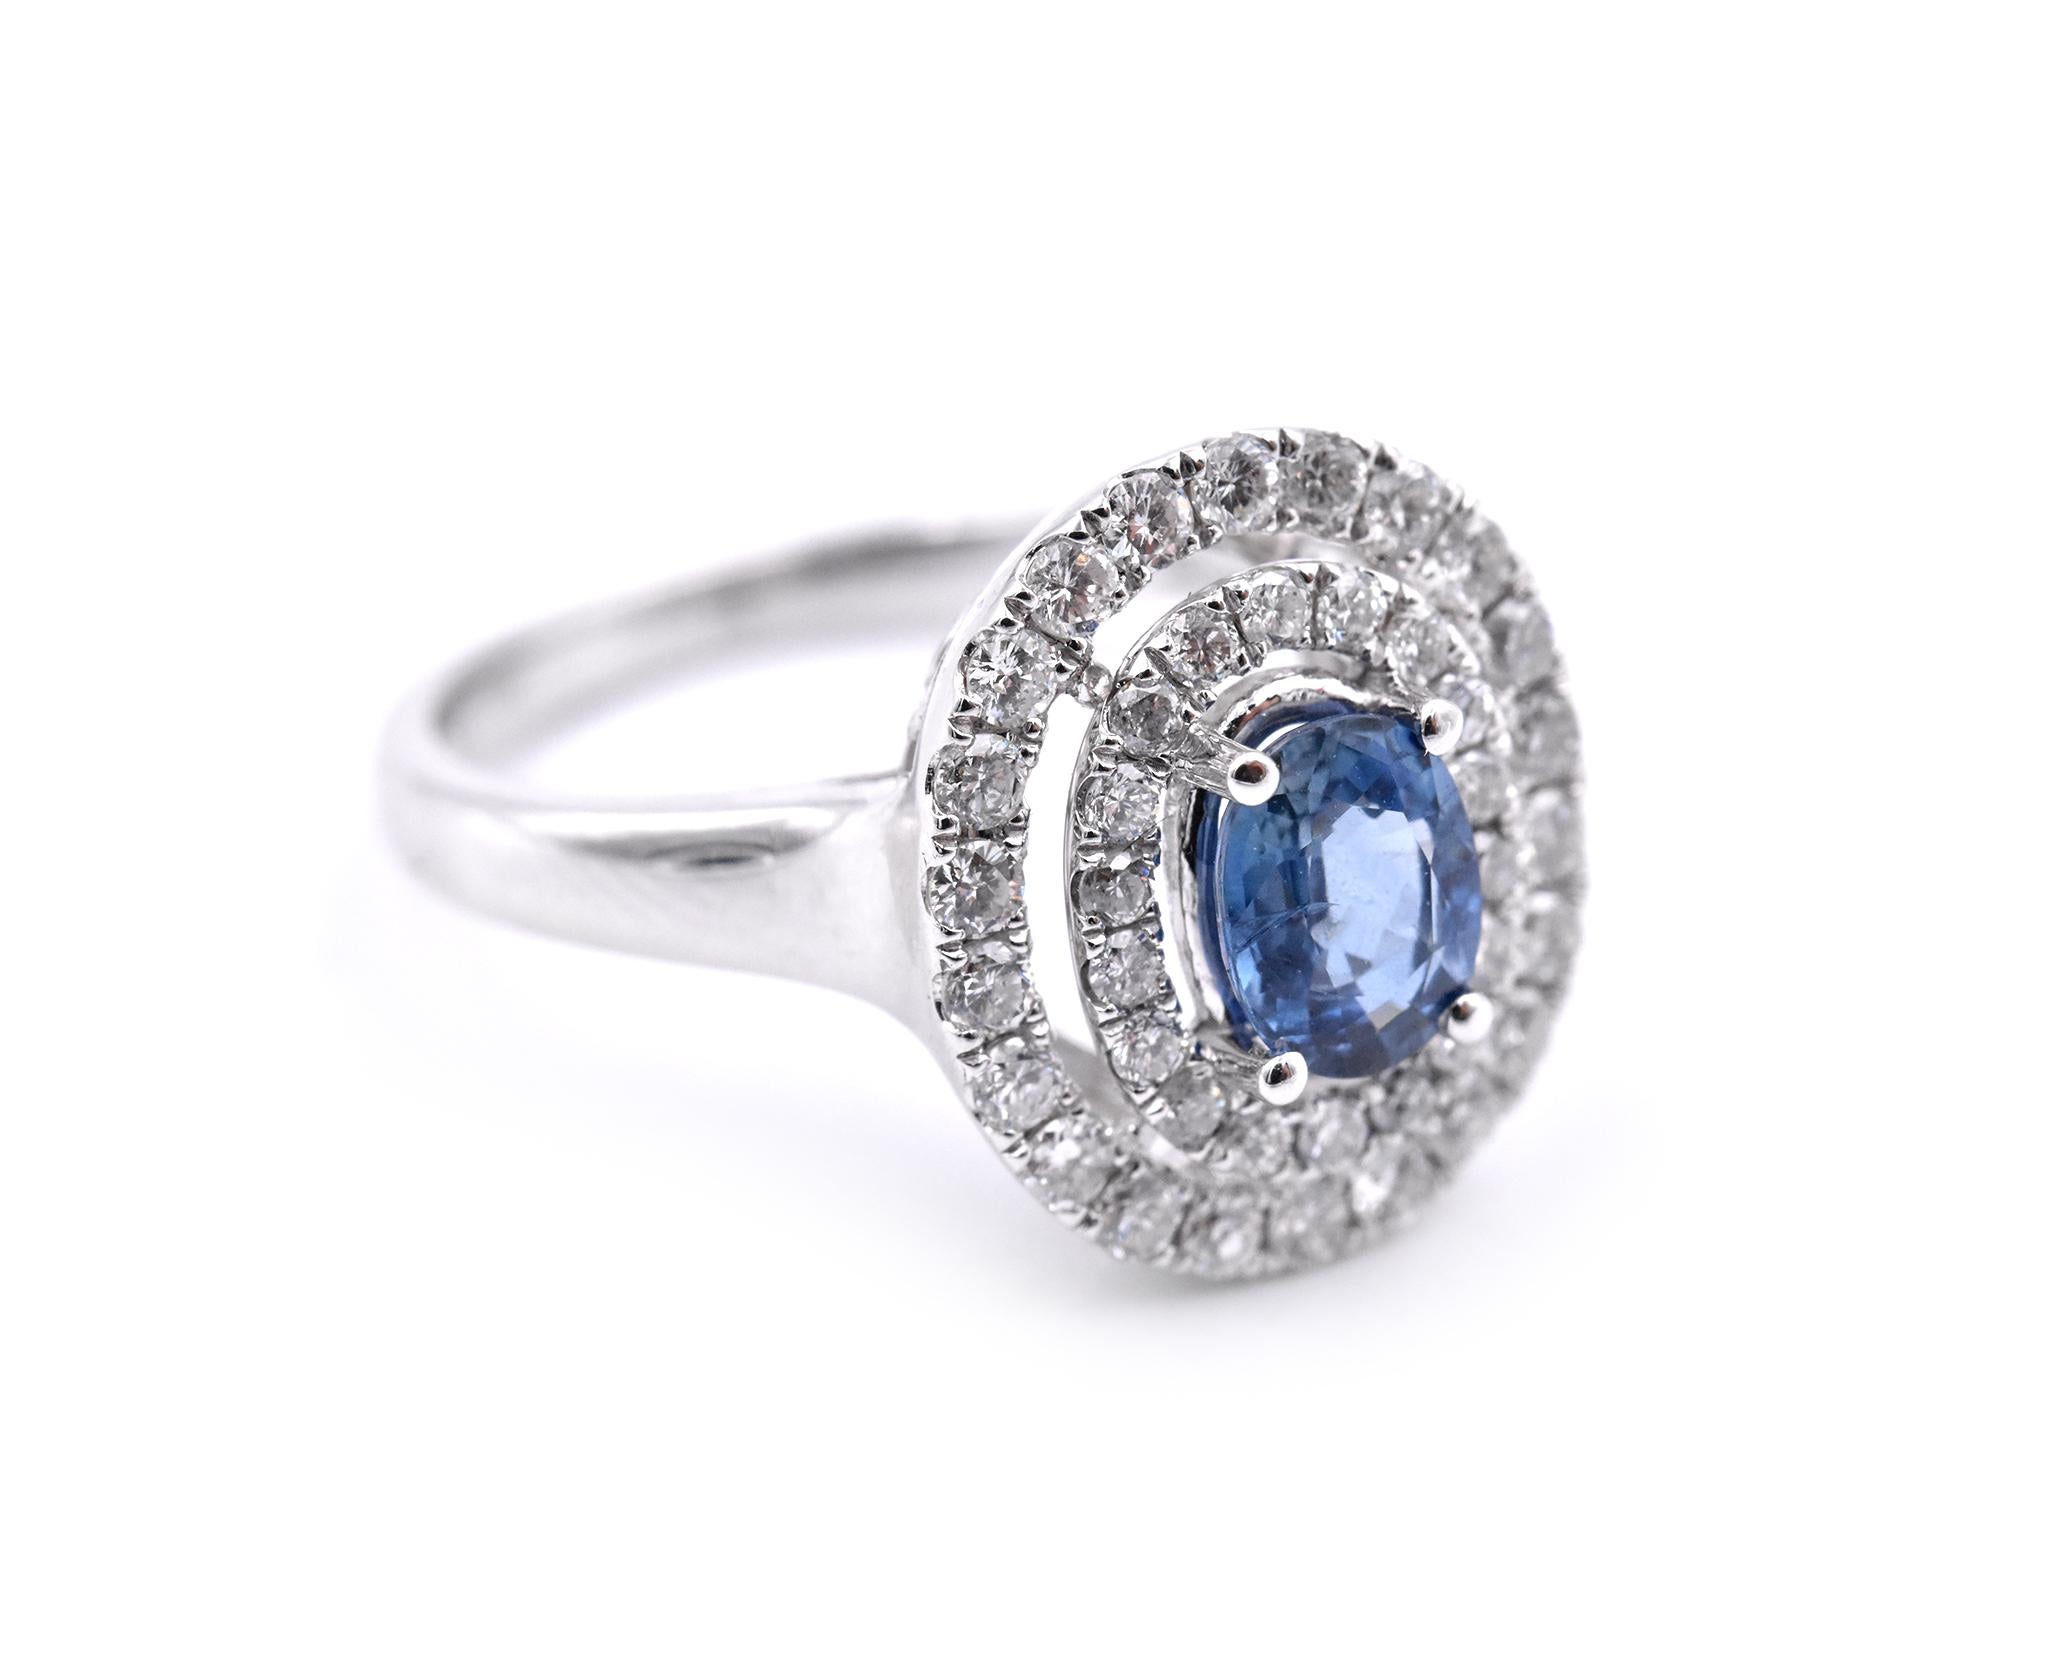 Designer: custom design
Material: 14k white gold
Gemstones: Sapphire = .78ct OVAL
Certification: AGI A1158
Diamonds: 40 round brilliant cuts = .70cttw
Color: G
Clarity: VS2-SI
Ring Size: 7.5 (please allow two additional shipping days for sizing